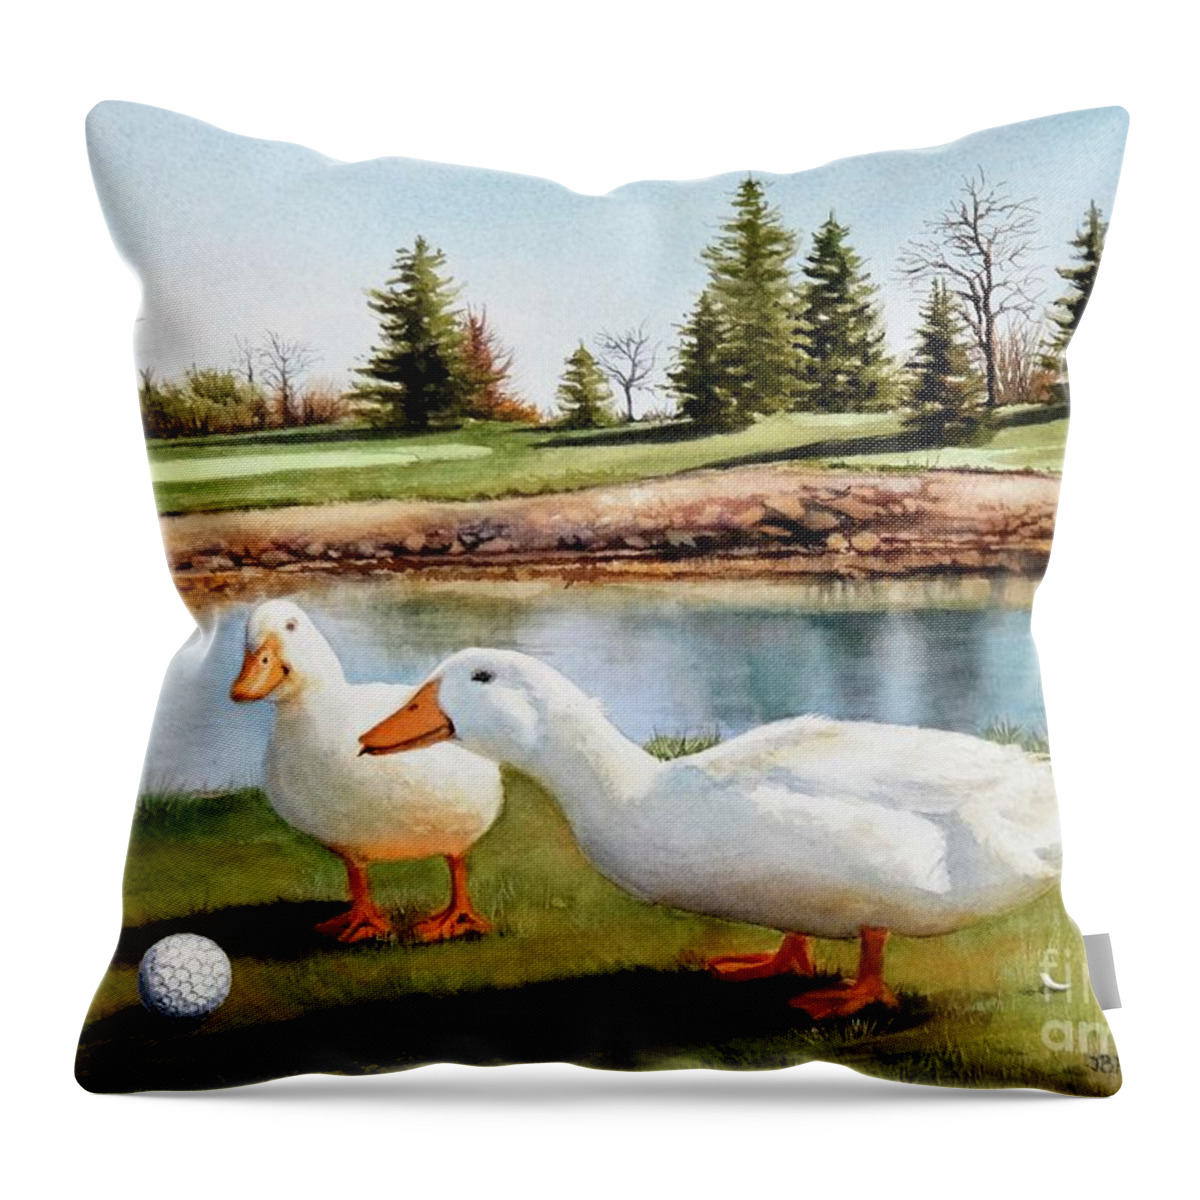 Ducks Throw Pillow featuring the painting Keep Your Eye on The Ball by Jeanette Ferguson